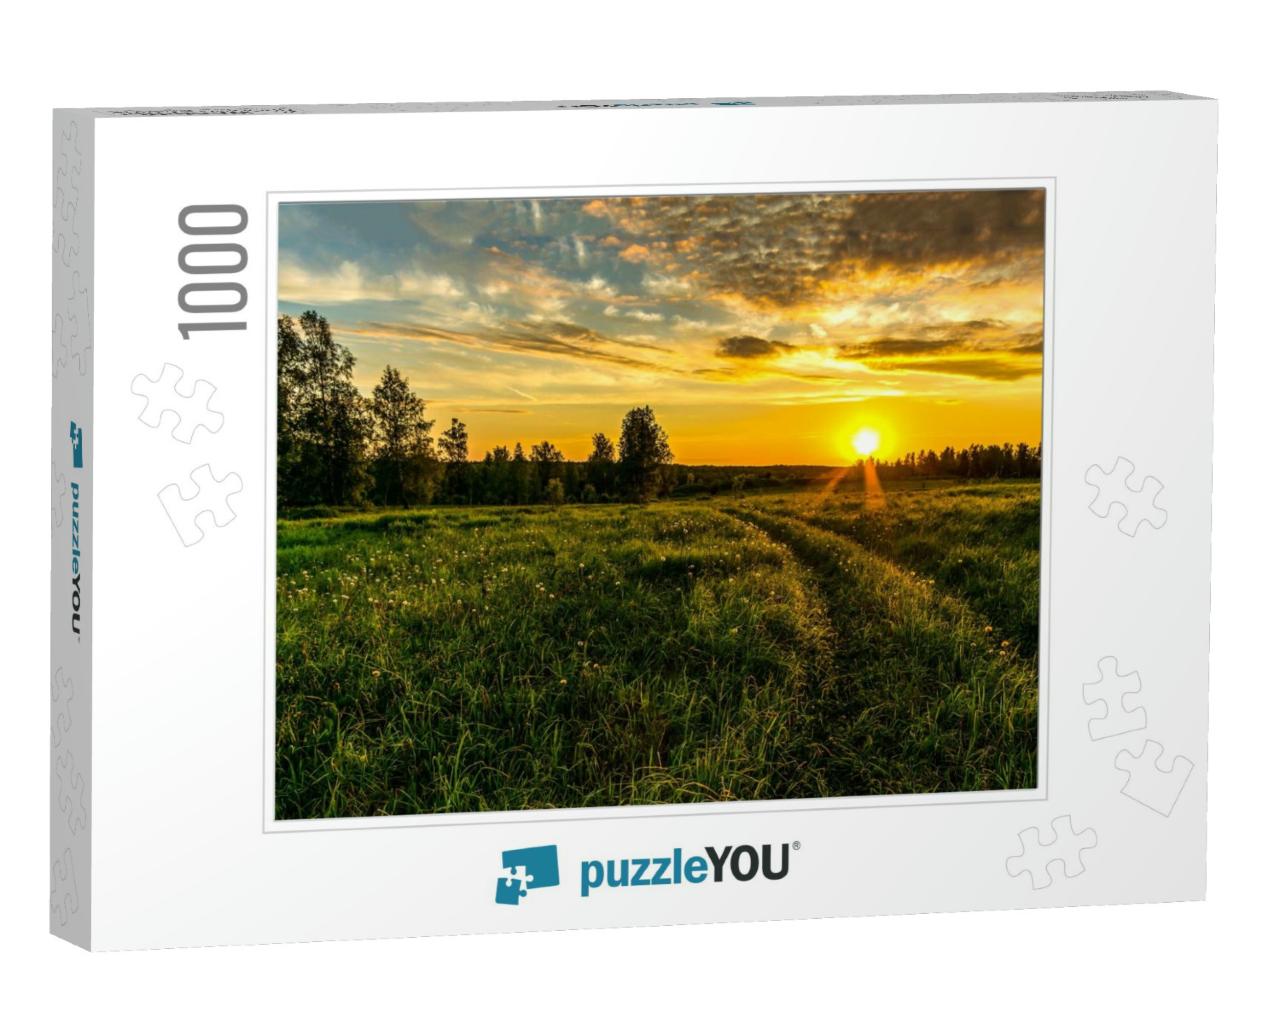 Sunset on the Horizon Over the Meadow on Rural Farm Lands... Jigsaw Puzzle with 1000 pieces